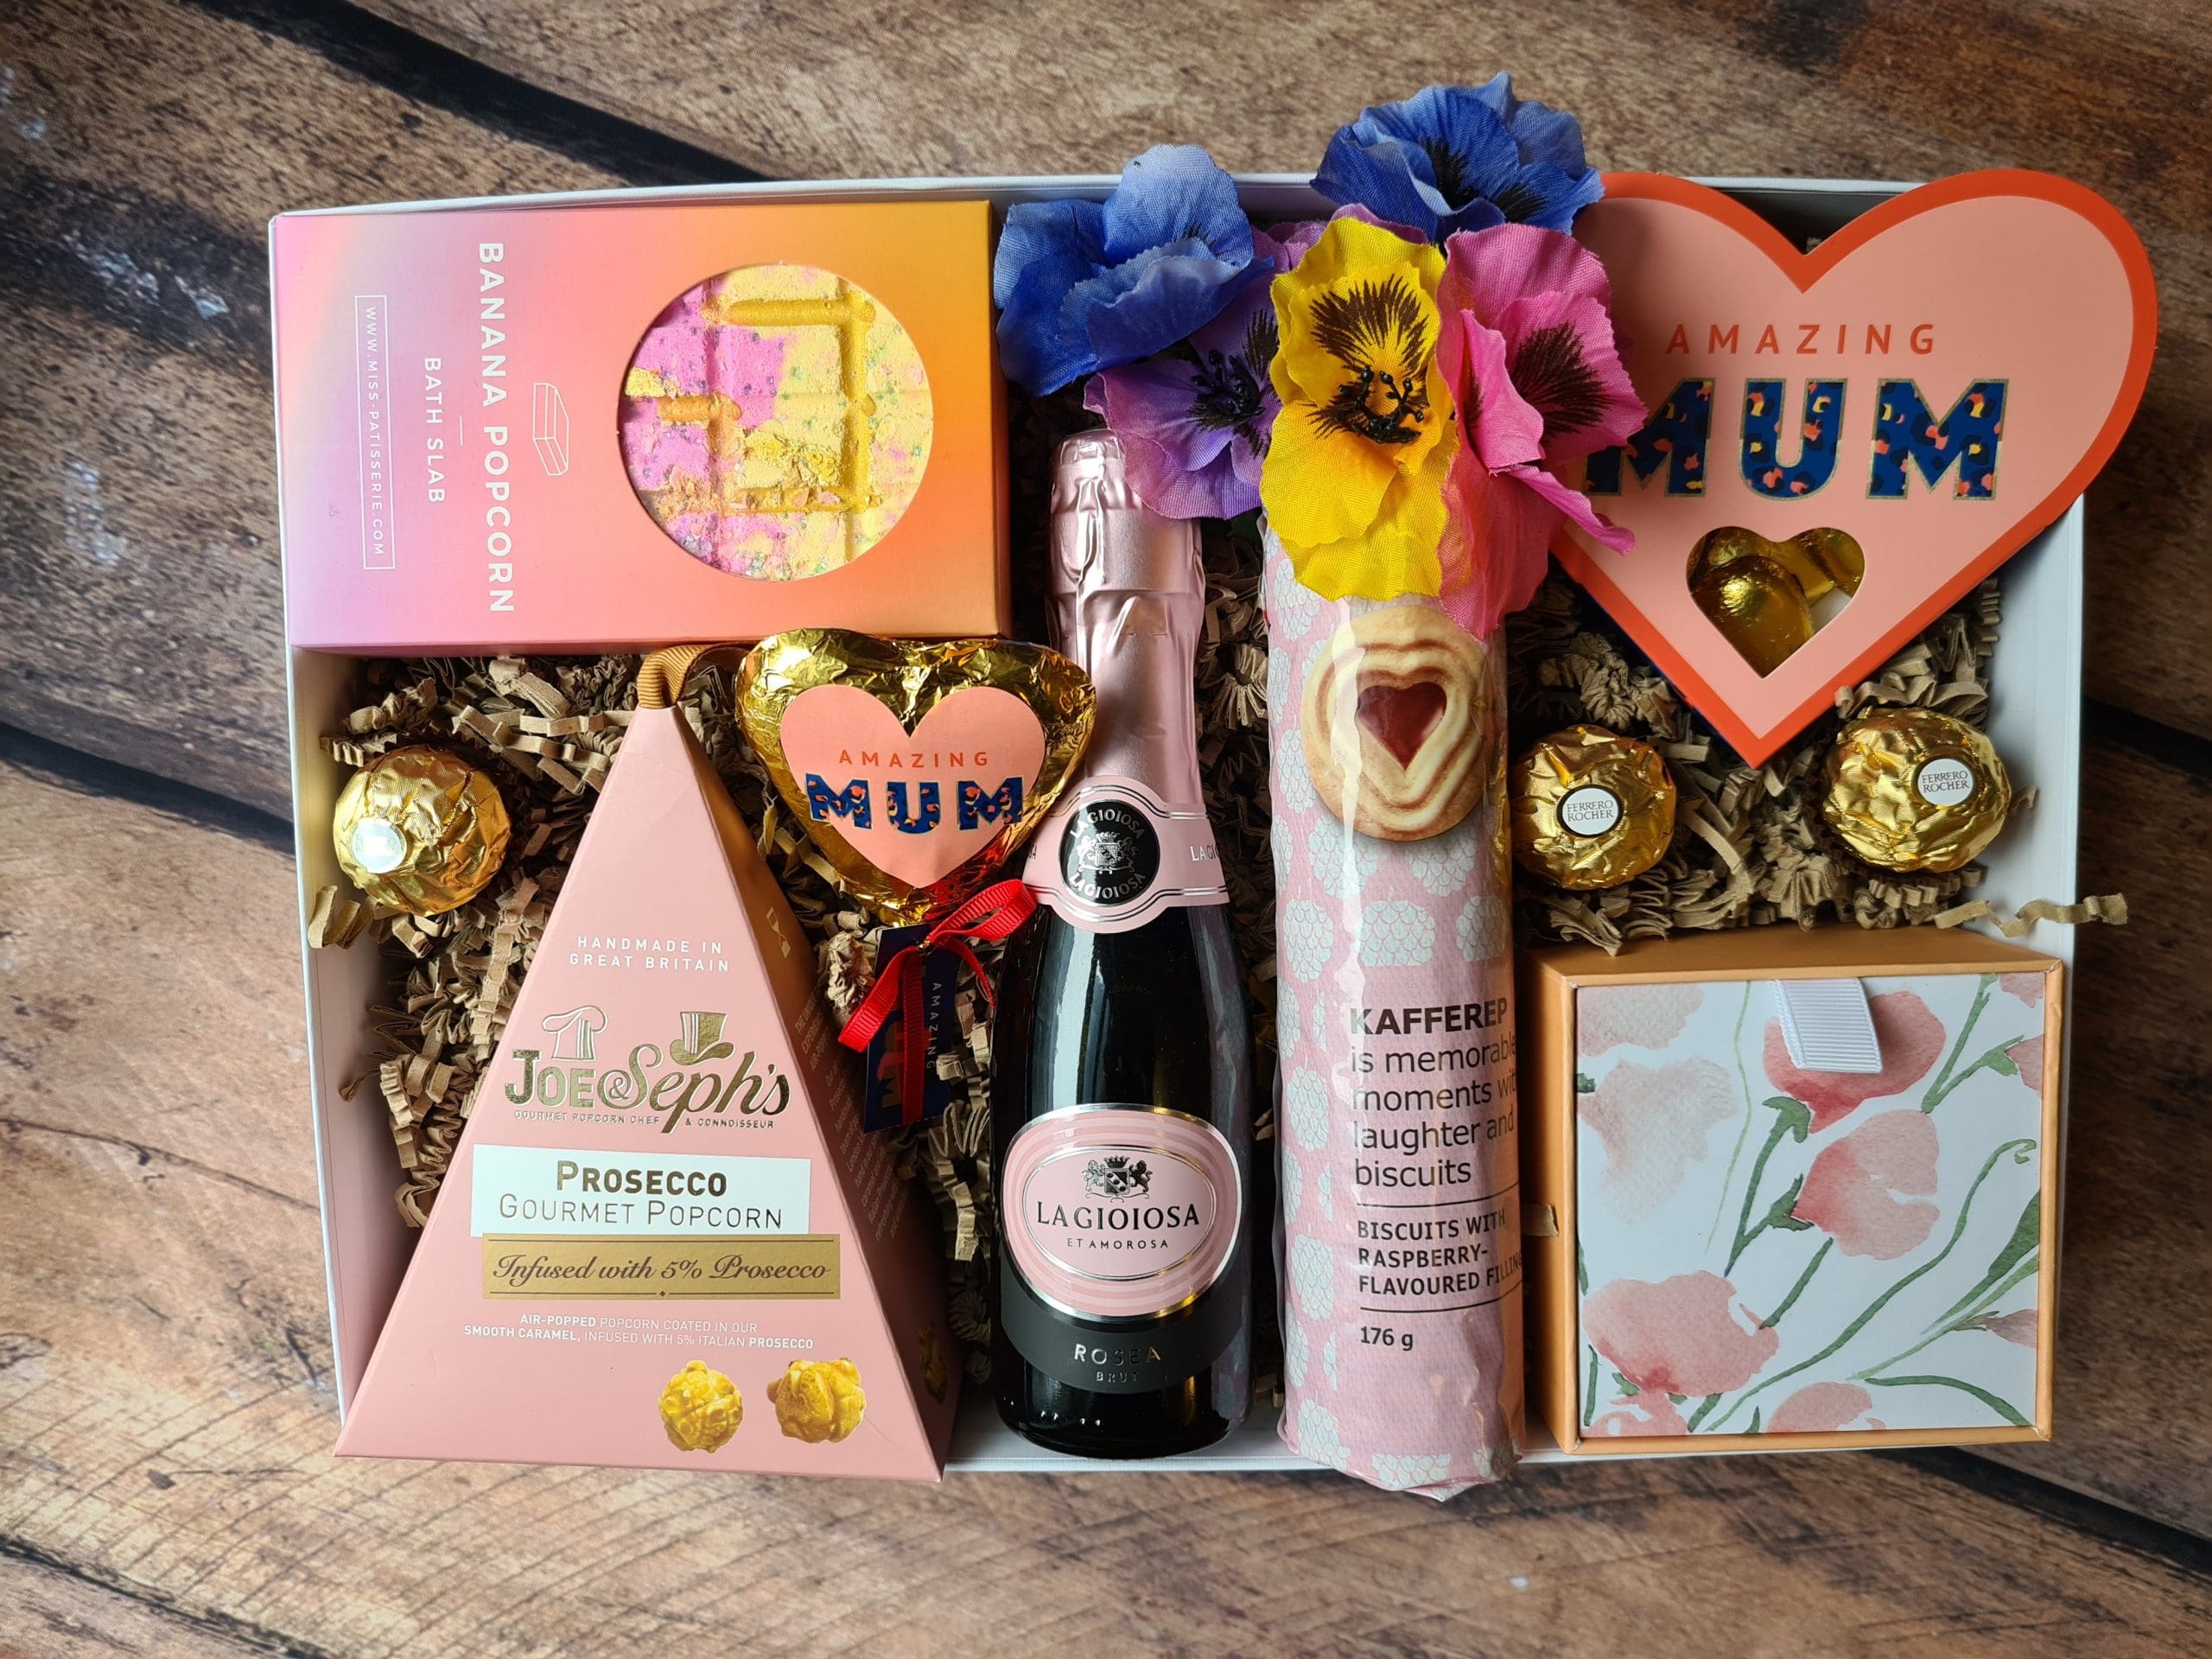 All the Love for Mum Hamper, mother's day hampers, wakuda